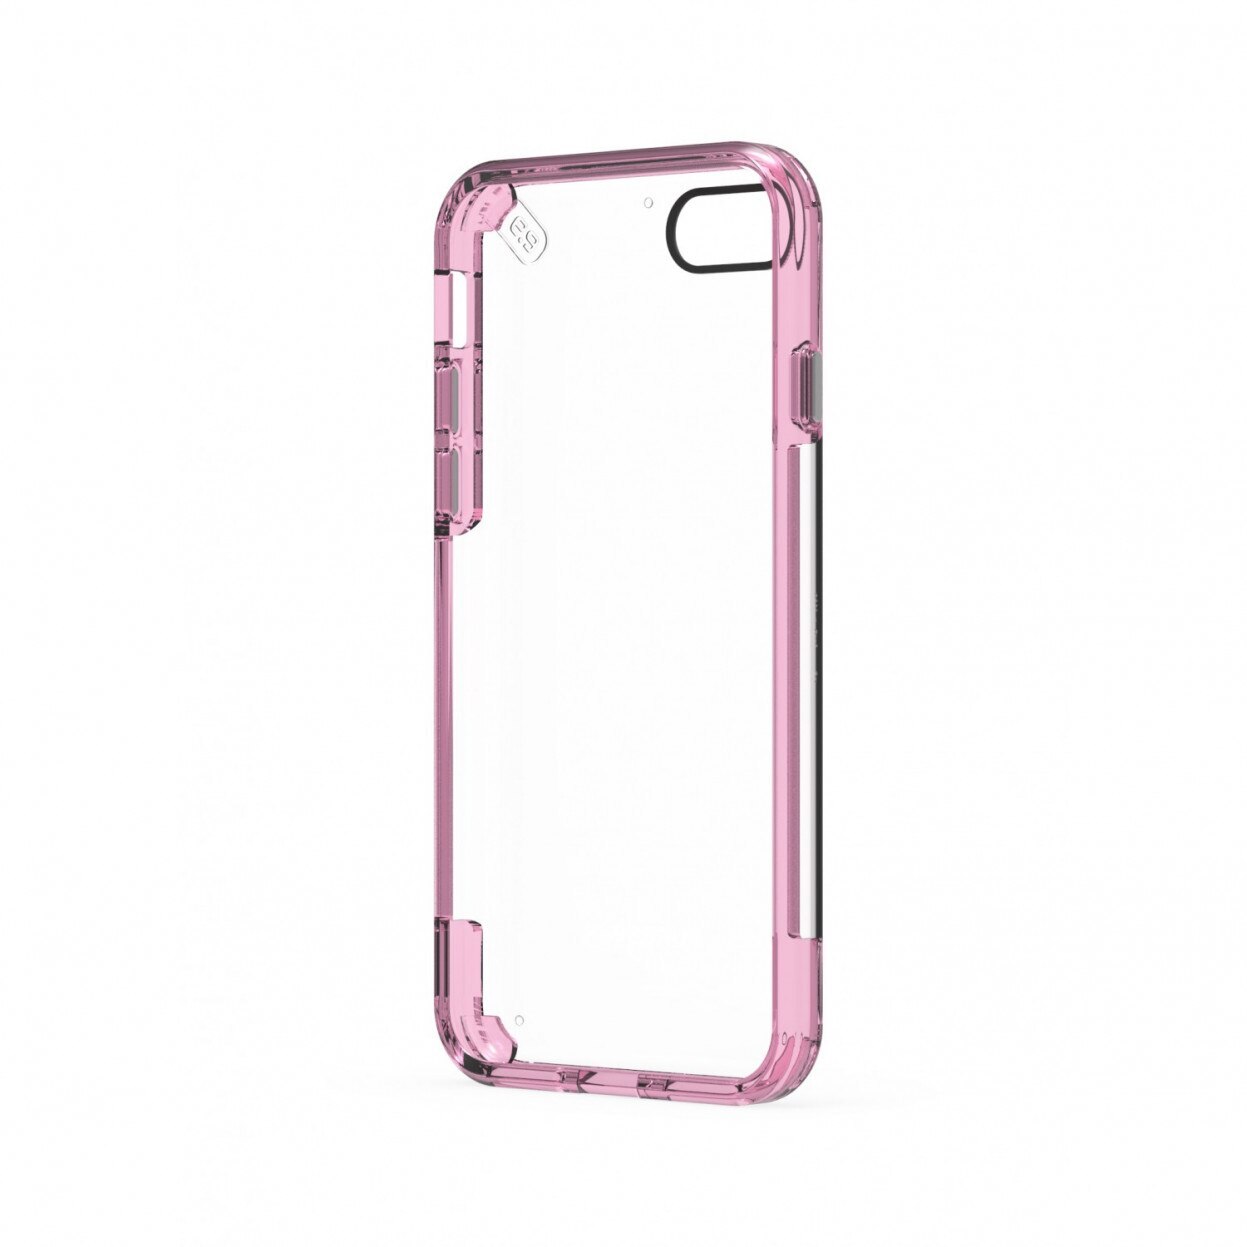 PURE-GEAR SLIM SHELL PRO CASE FOR IPHONE 7 - CLEAR/PINK